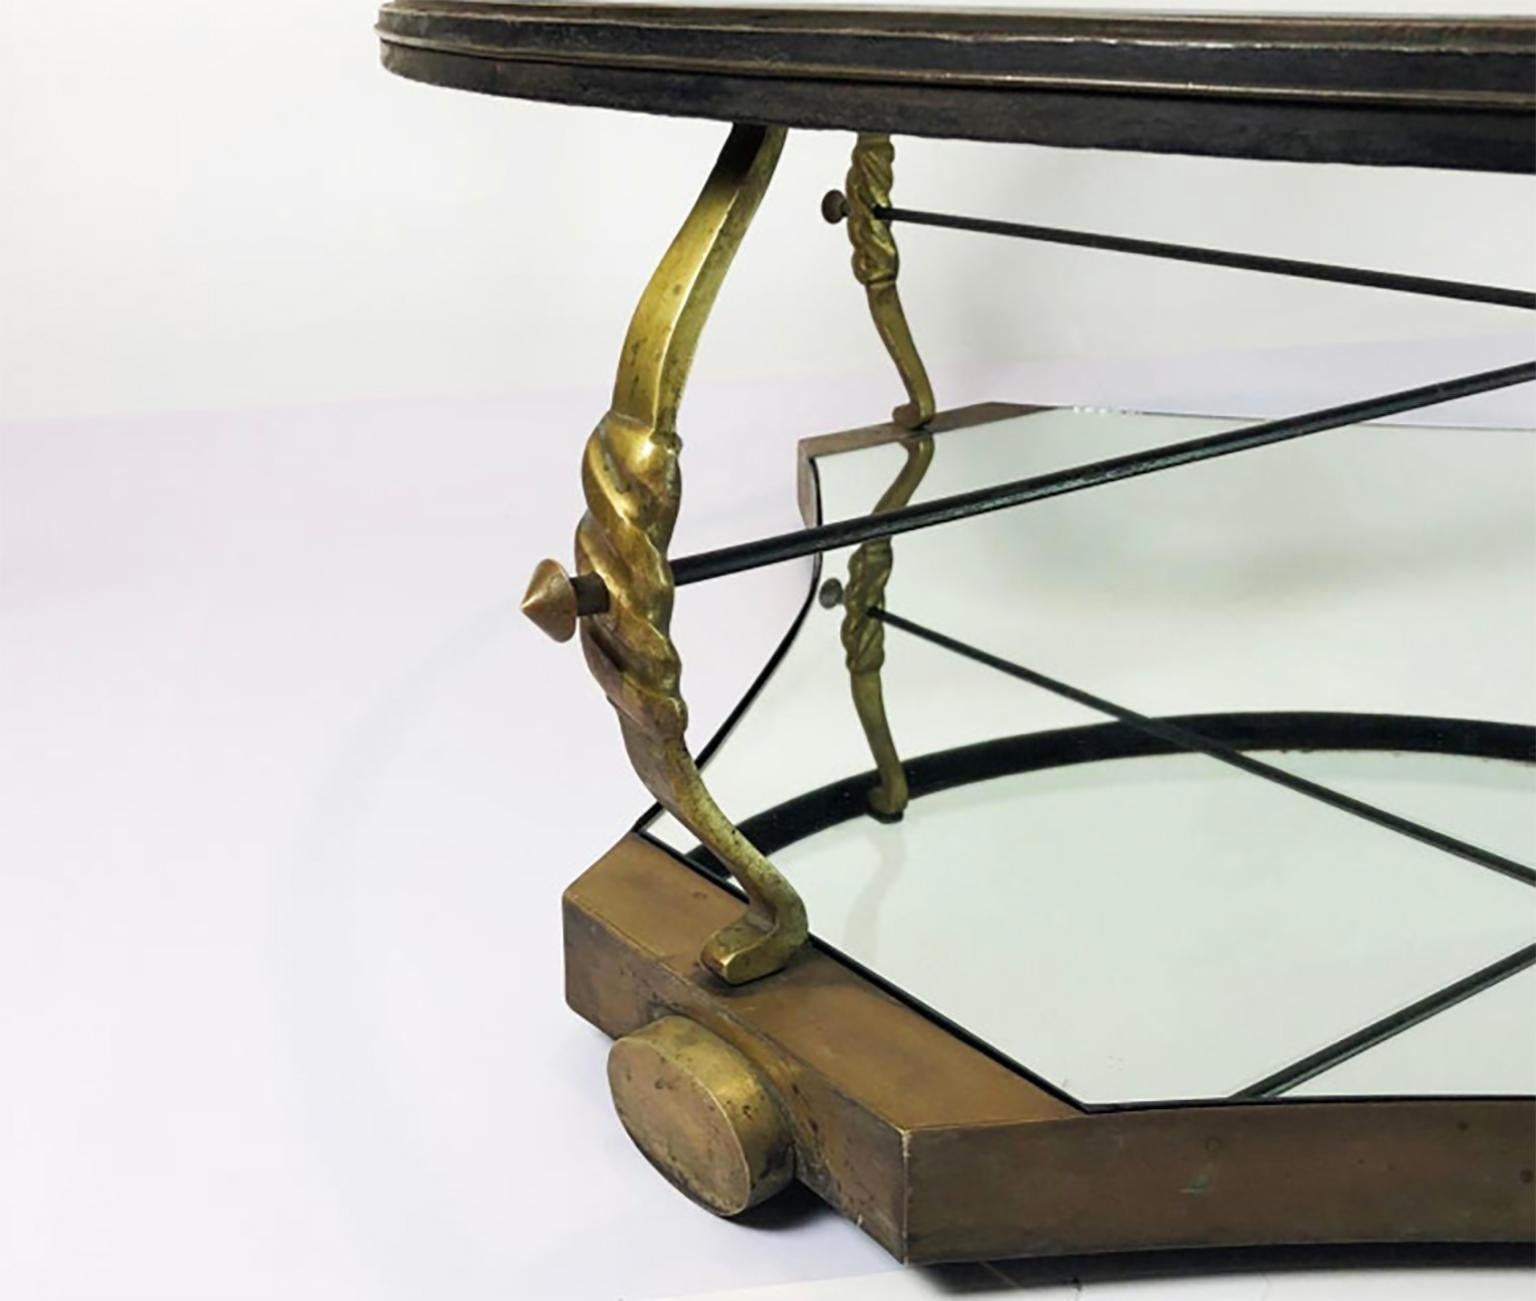 Made in Mexico, circa 1950s, designed by Arturo Pani, the table has original mirror and glass, can be delivered polished and can be disassembled for better shipping.
We have found some information that the designer of this table is Arturo Pani.